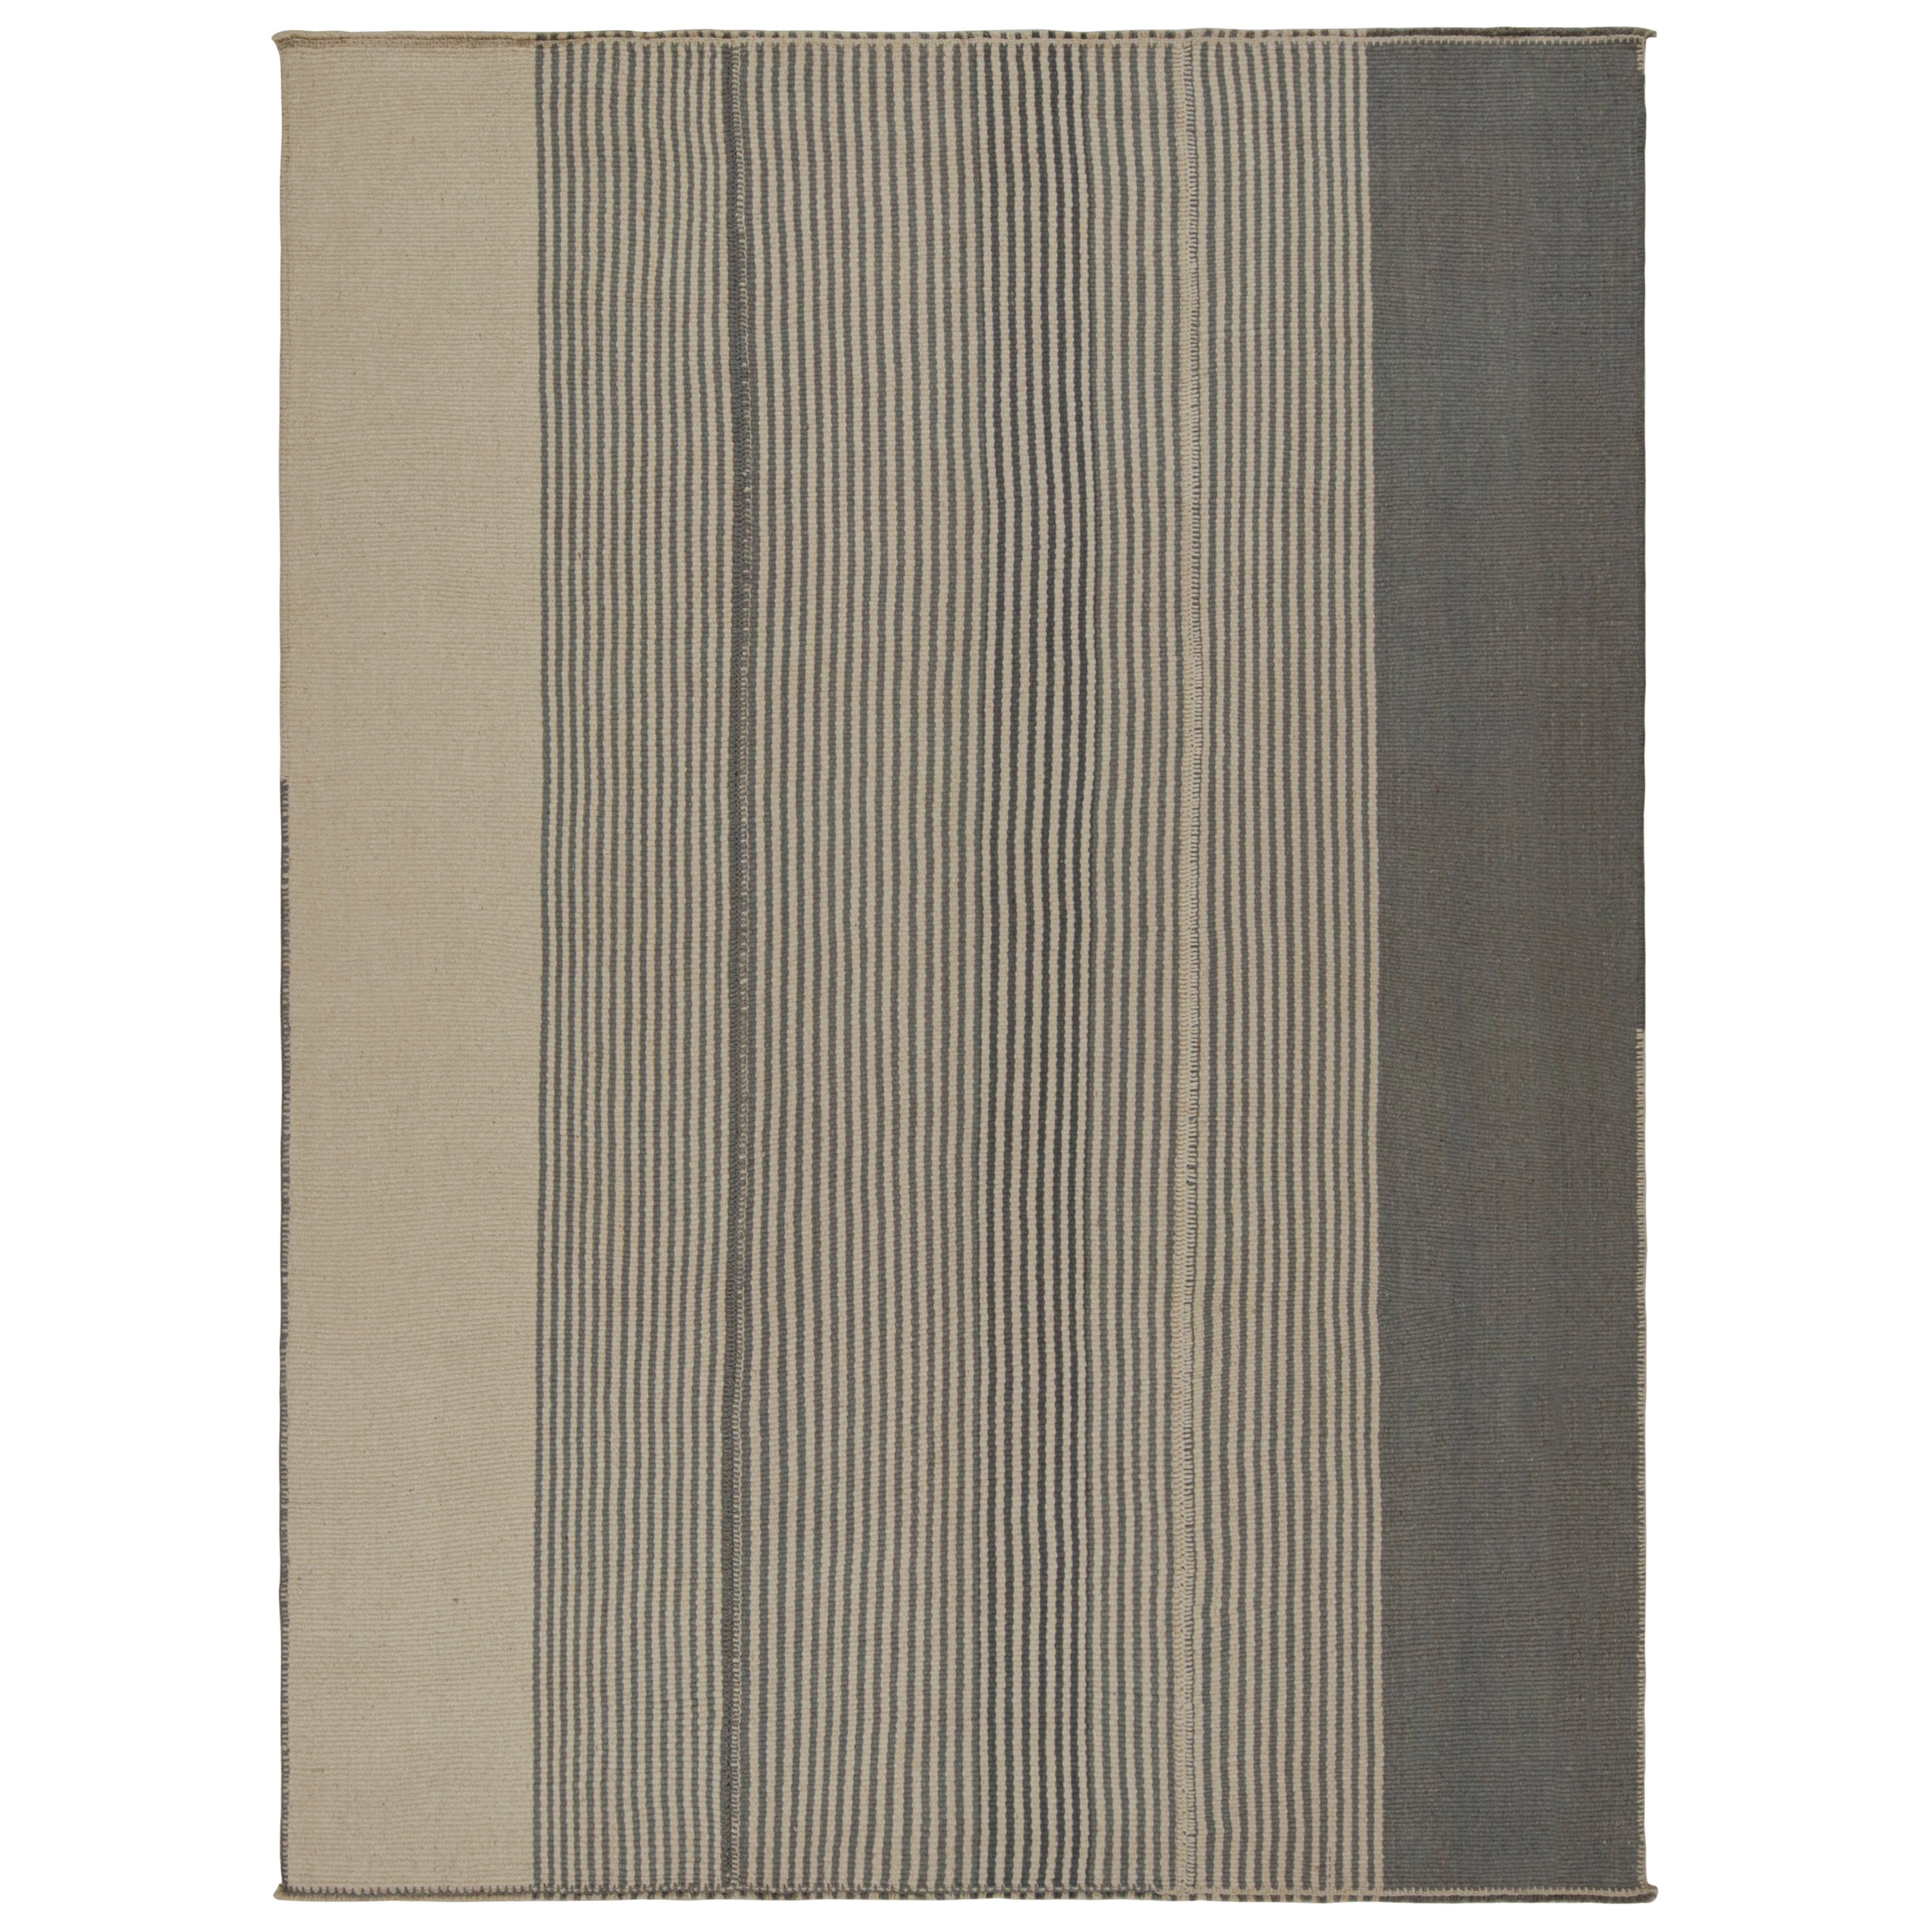 Rug & Kilim’s Contemporary Kilim, with Vertical Stripes in Beige and Brown For Sale